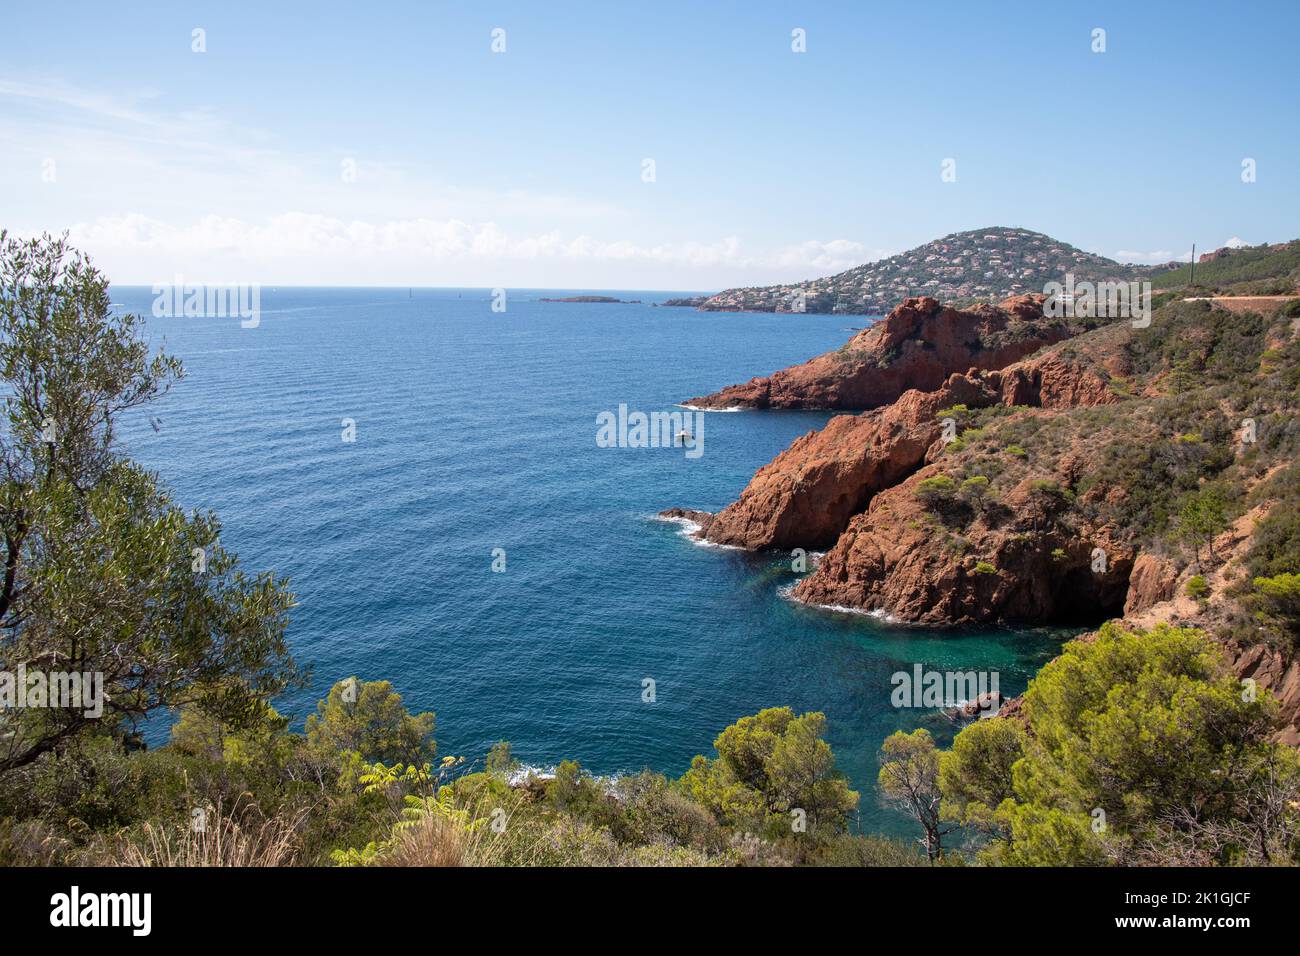 The rocky cliffs along the coast of the Massif d l'Esterel in the Côte d'Azur France. Stock Photo